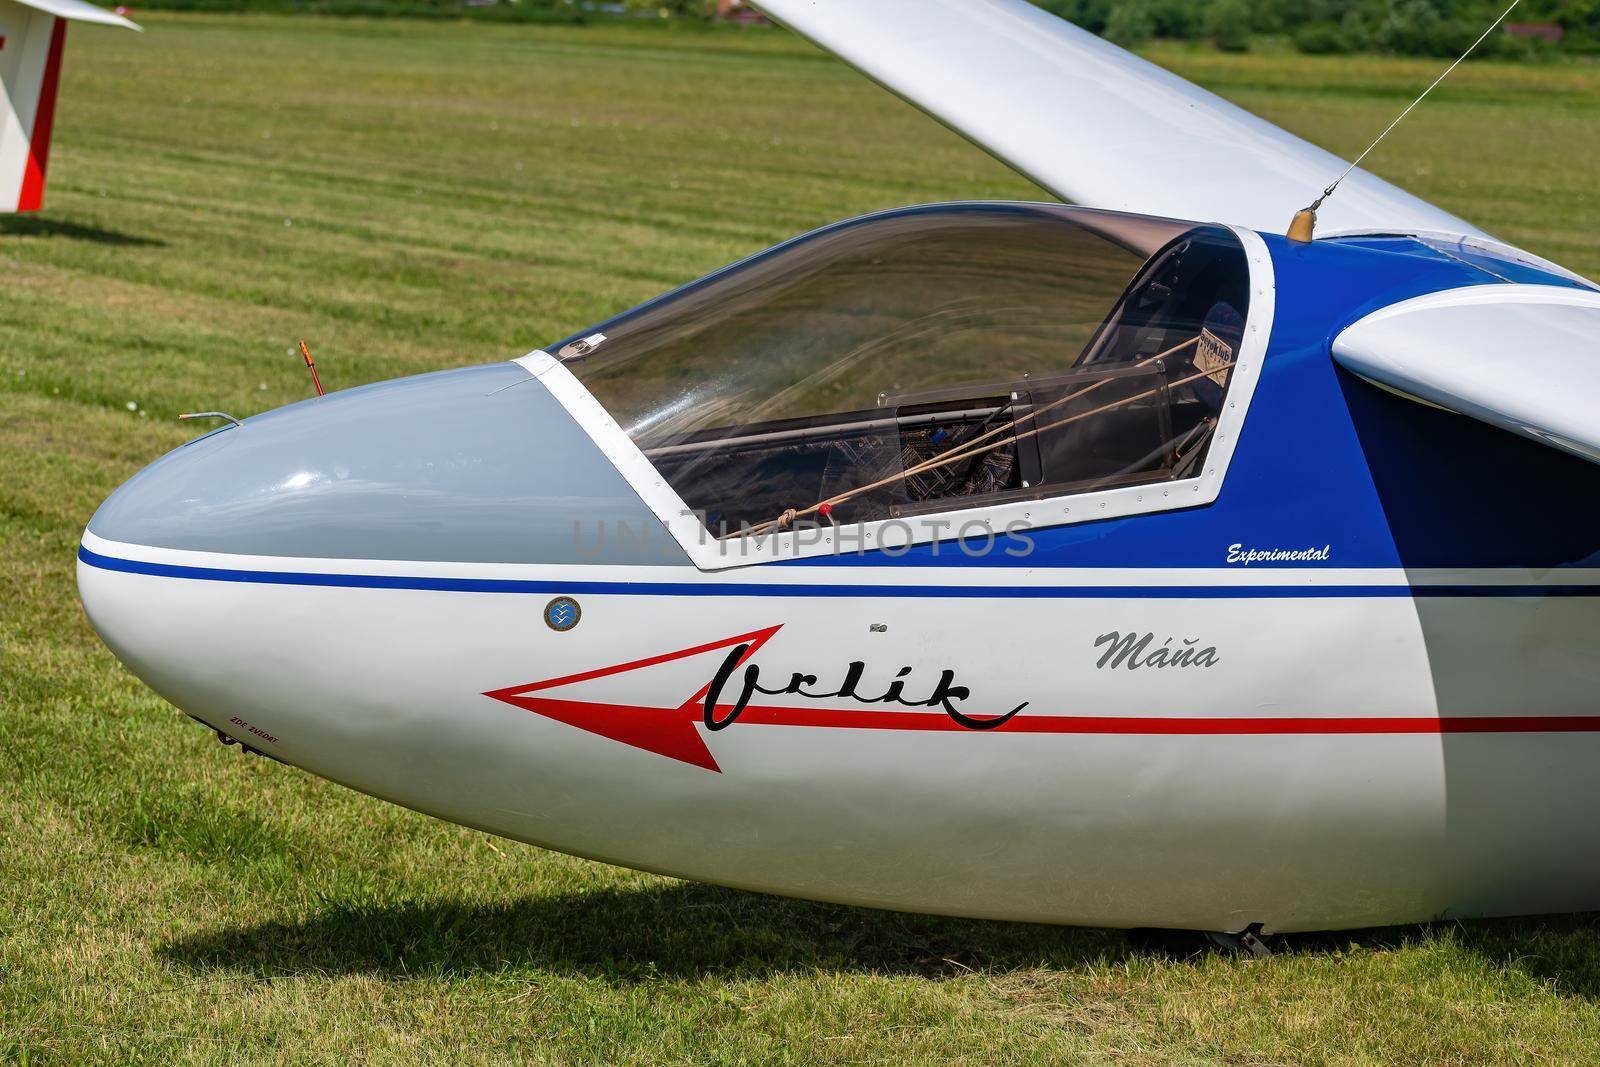 Orlik light glider, a non-motorized aircraft front of the aircraft by rostik924